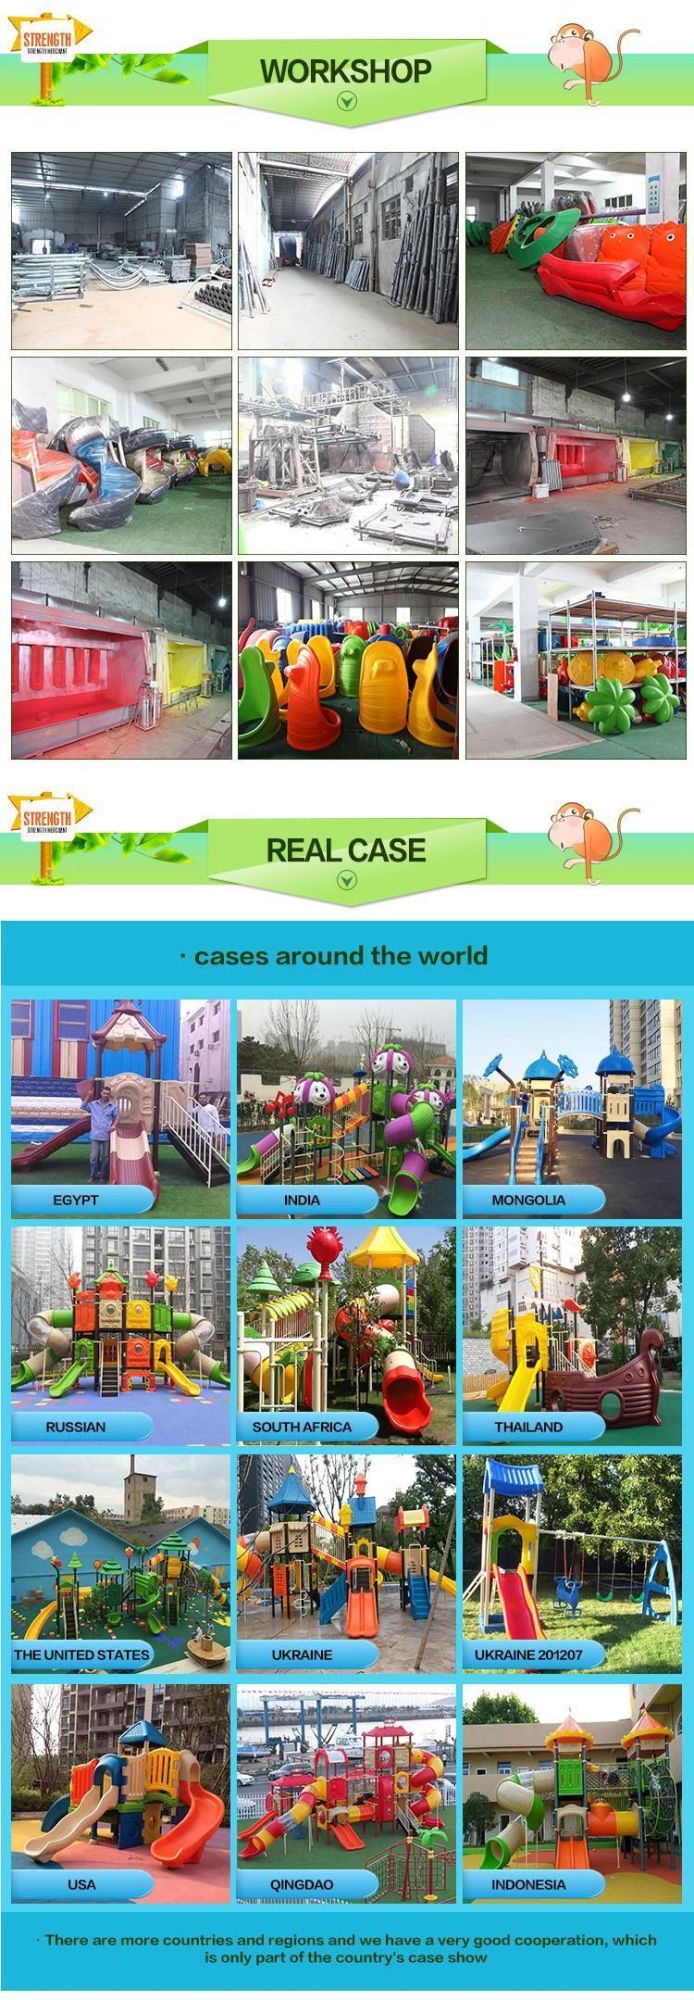 New Plastic Product Outdoor Playground for Amusement